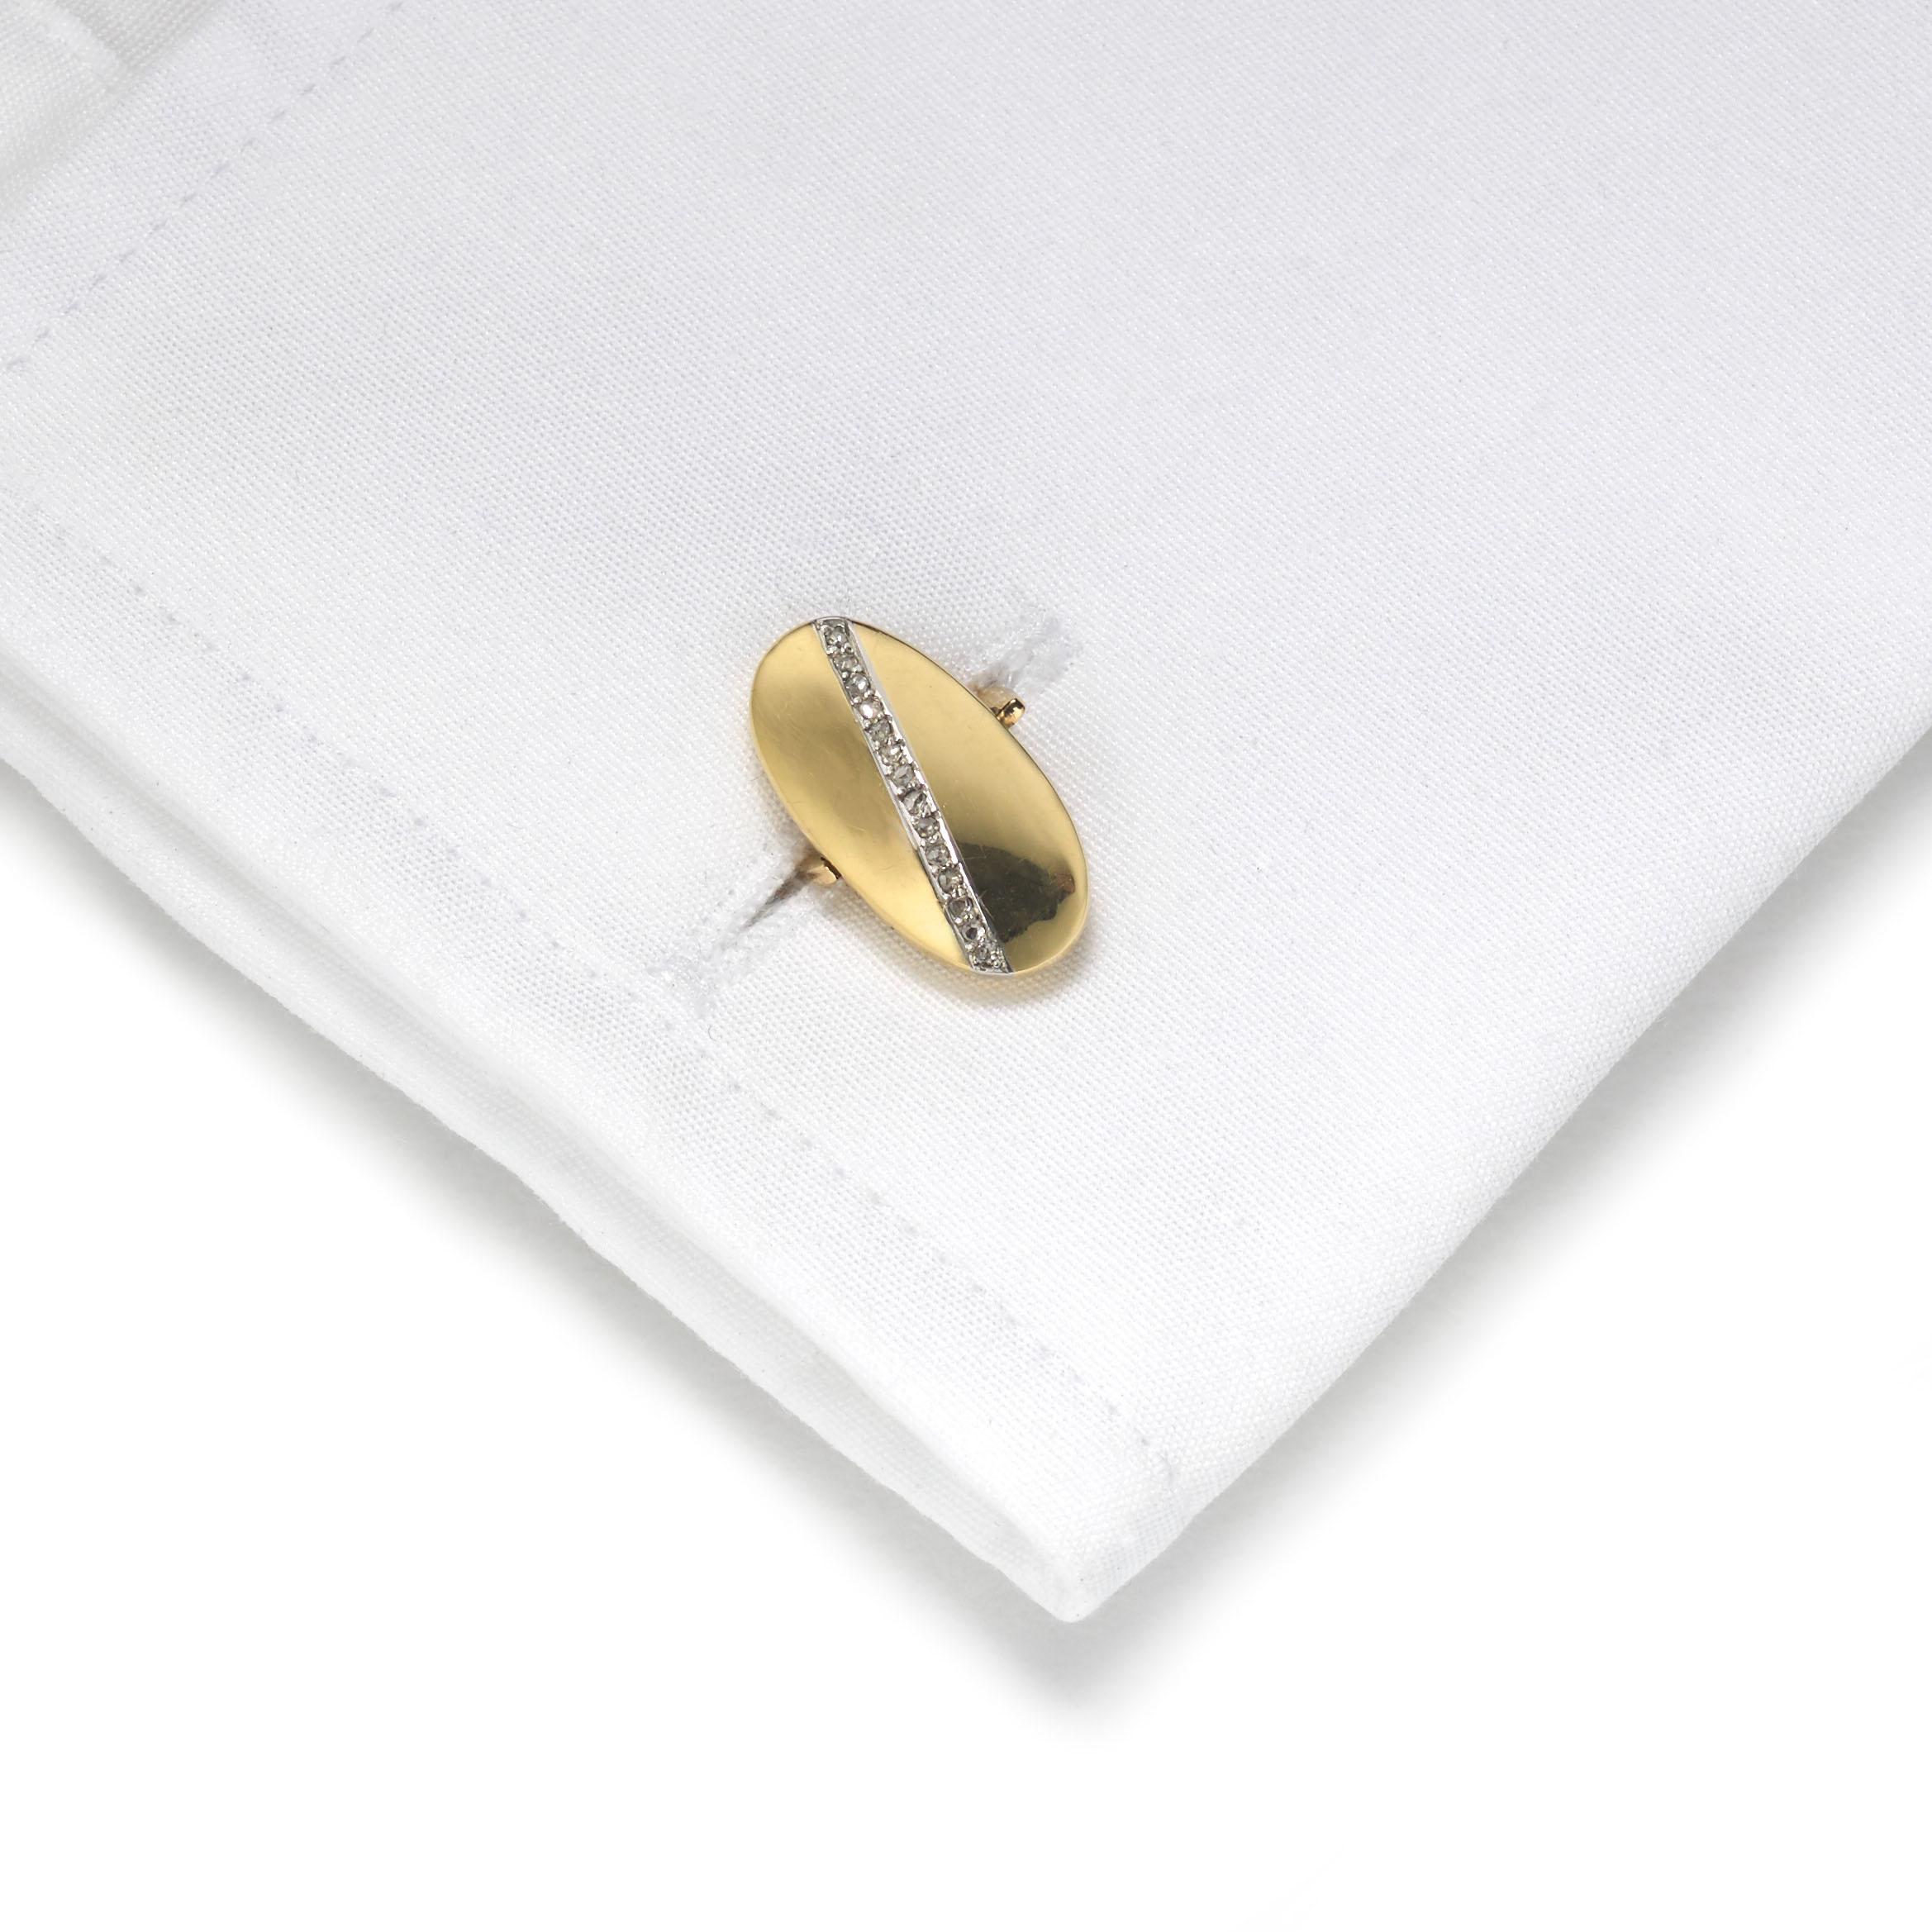 A pair of reversible gold cufflinks, set with a line of rose-cut diamonds, in grain settings, on oval, convex, hollow work heads, with solid swivel links, marked RGD 14856, 750, with French weevil marks, for 18ct gold imported into France, circa